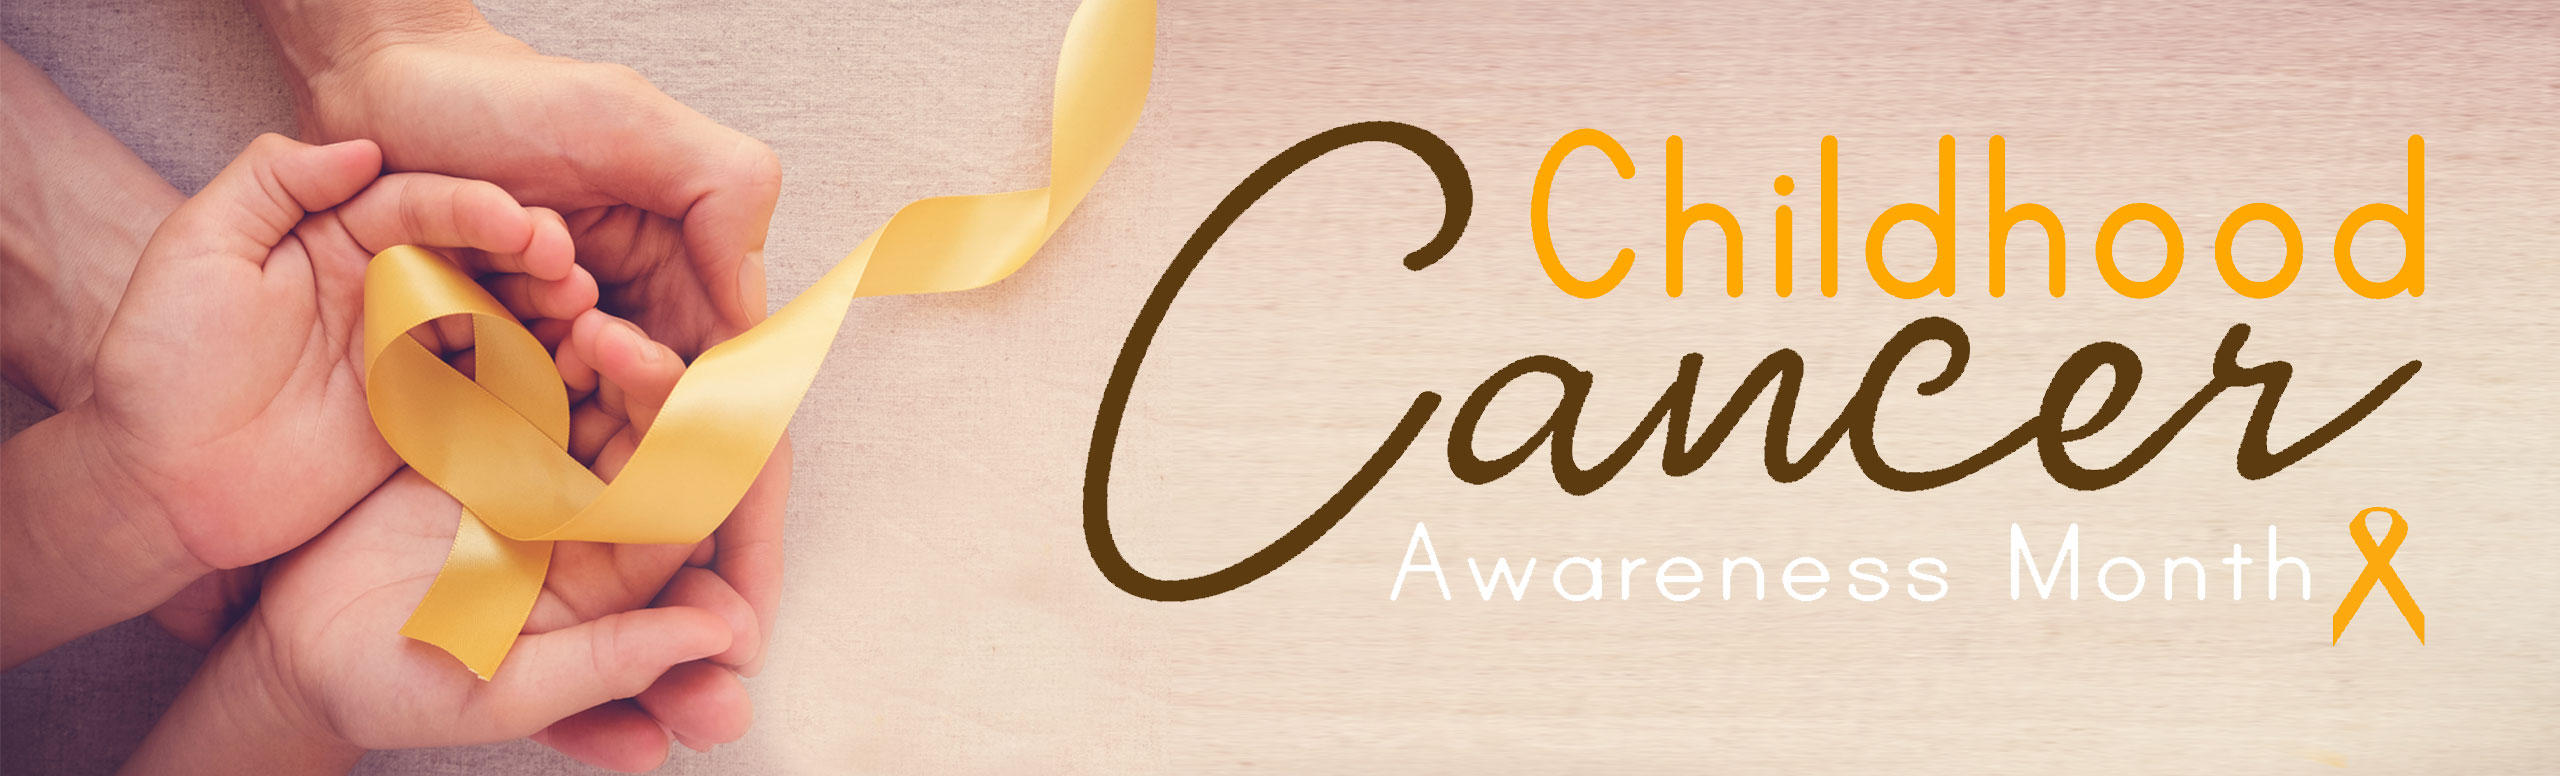 Banner picture of adult hands cupping a child's hands. The child is holding a ribbon in his hands. The banner says:
Childhood Cancer Awareness Month